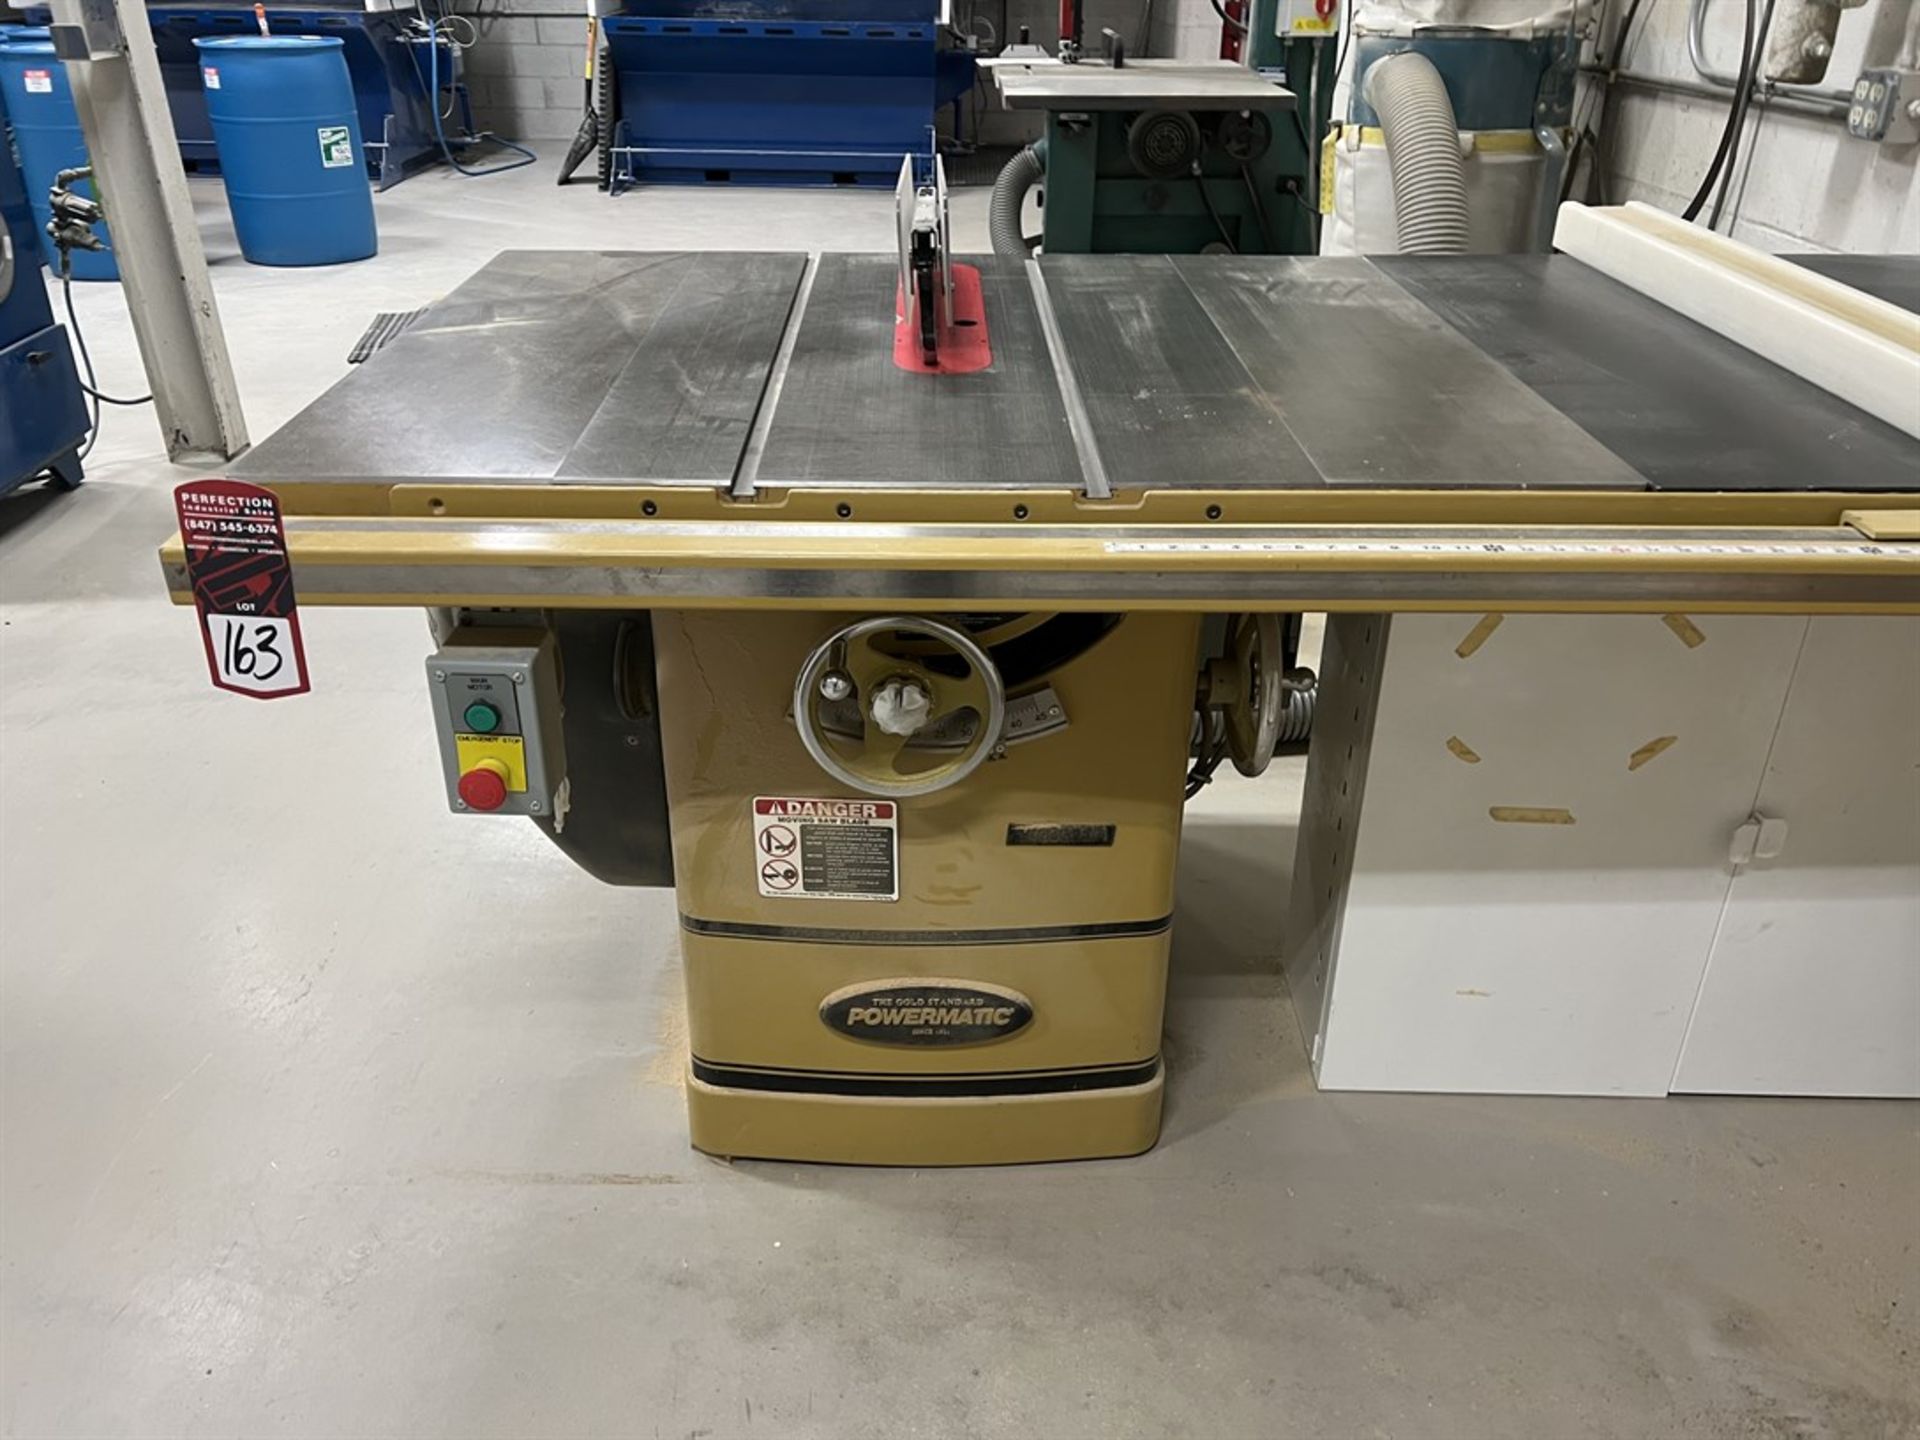 POWERMATIC PM3000 Table Saw, s/n 71130000082 (A removal/rigging fee of $175 will be added to the - Image 2 of 6